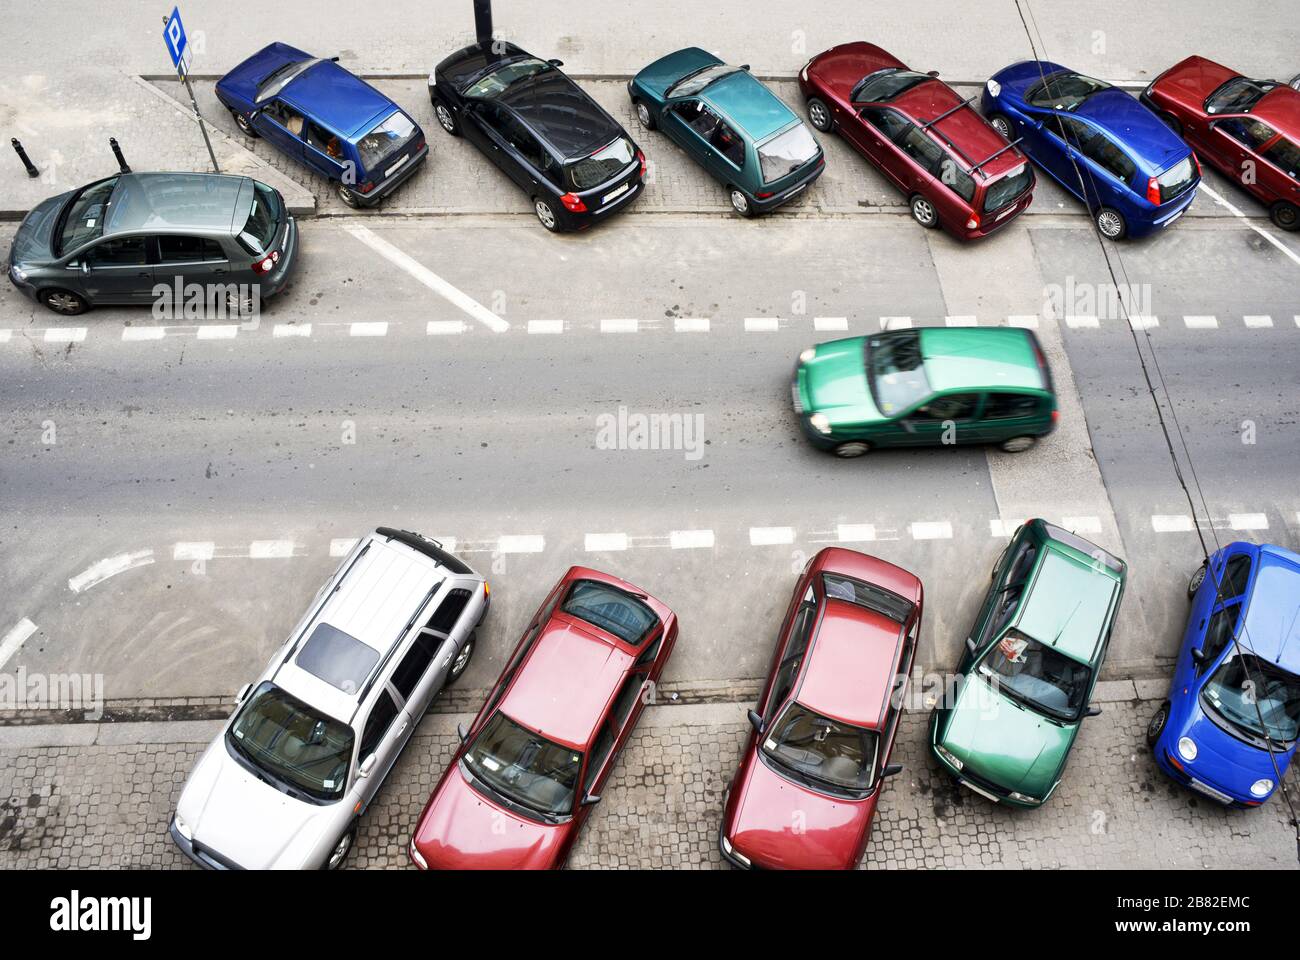 Warsaw, Poland 04-17-2013 cars parking in a small one way street Stock Photo